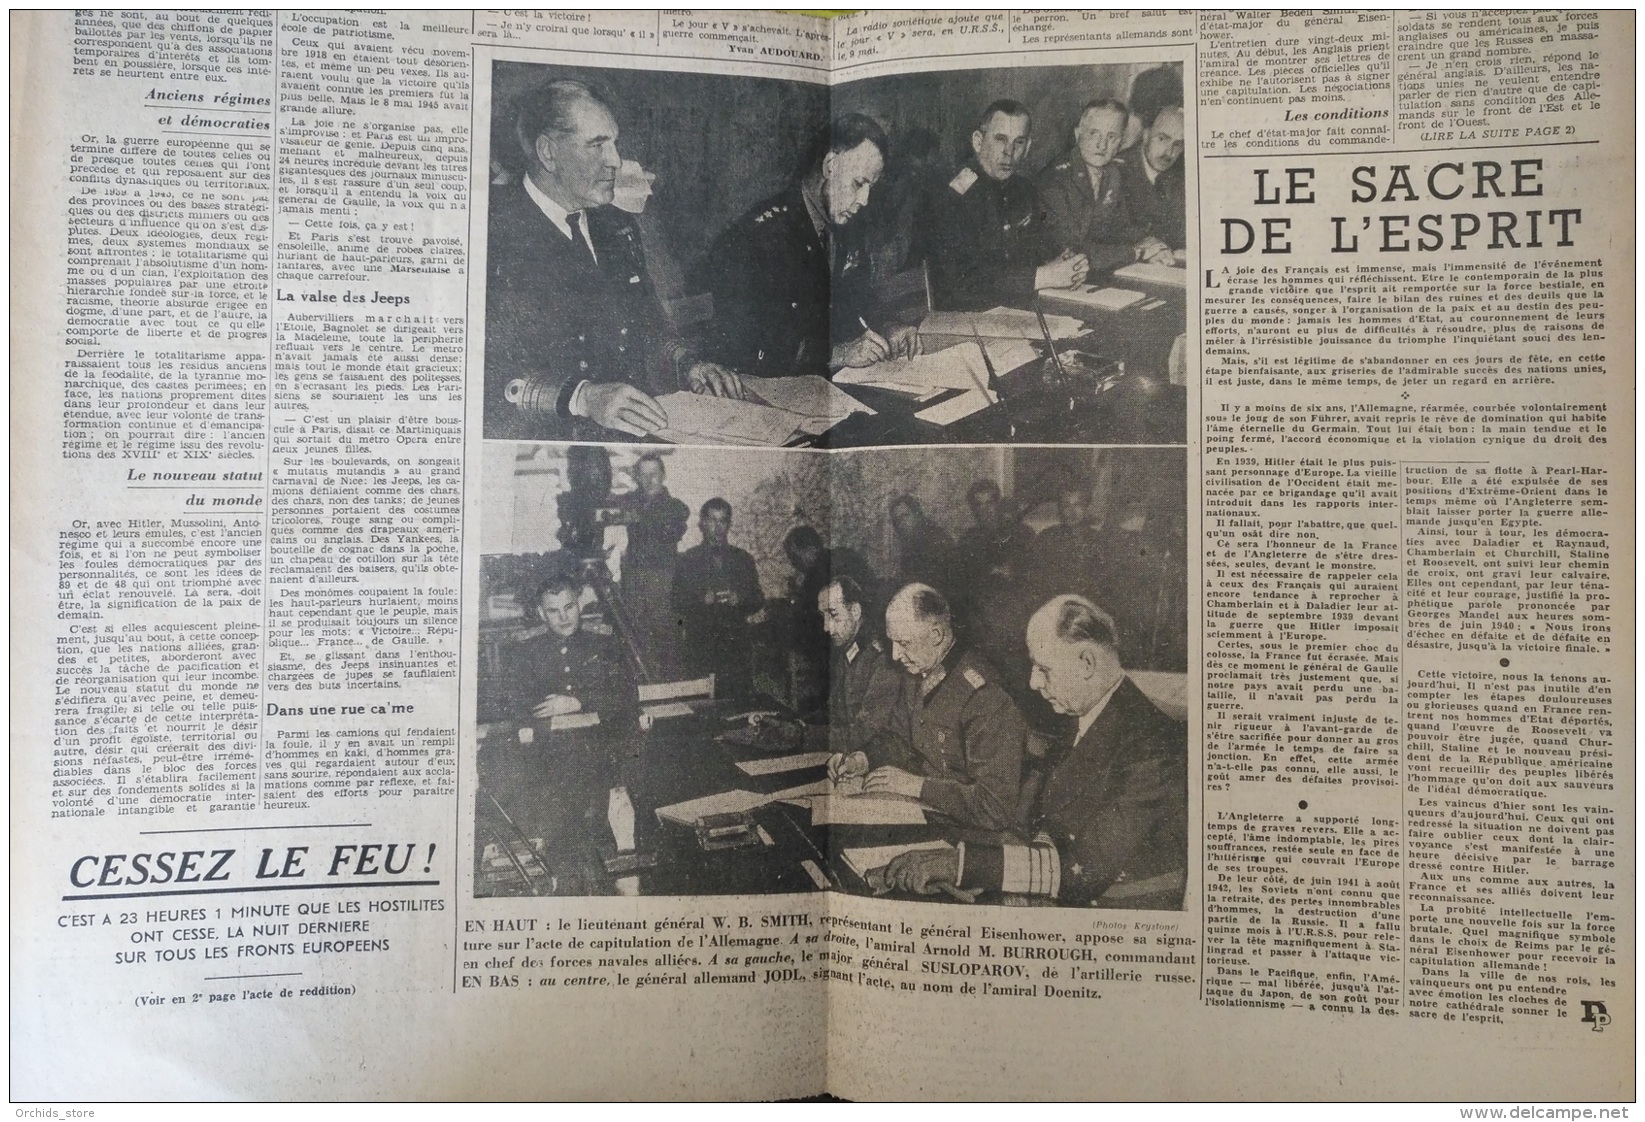 BOX - 9 MAY 1945 WWII VICTORY ISSUE N.62 Newspaper LA DEPECHE DE PARIS - Capitulation Of Germany - Documenti Storici